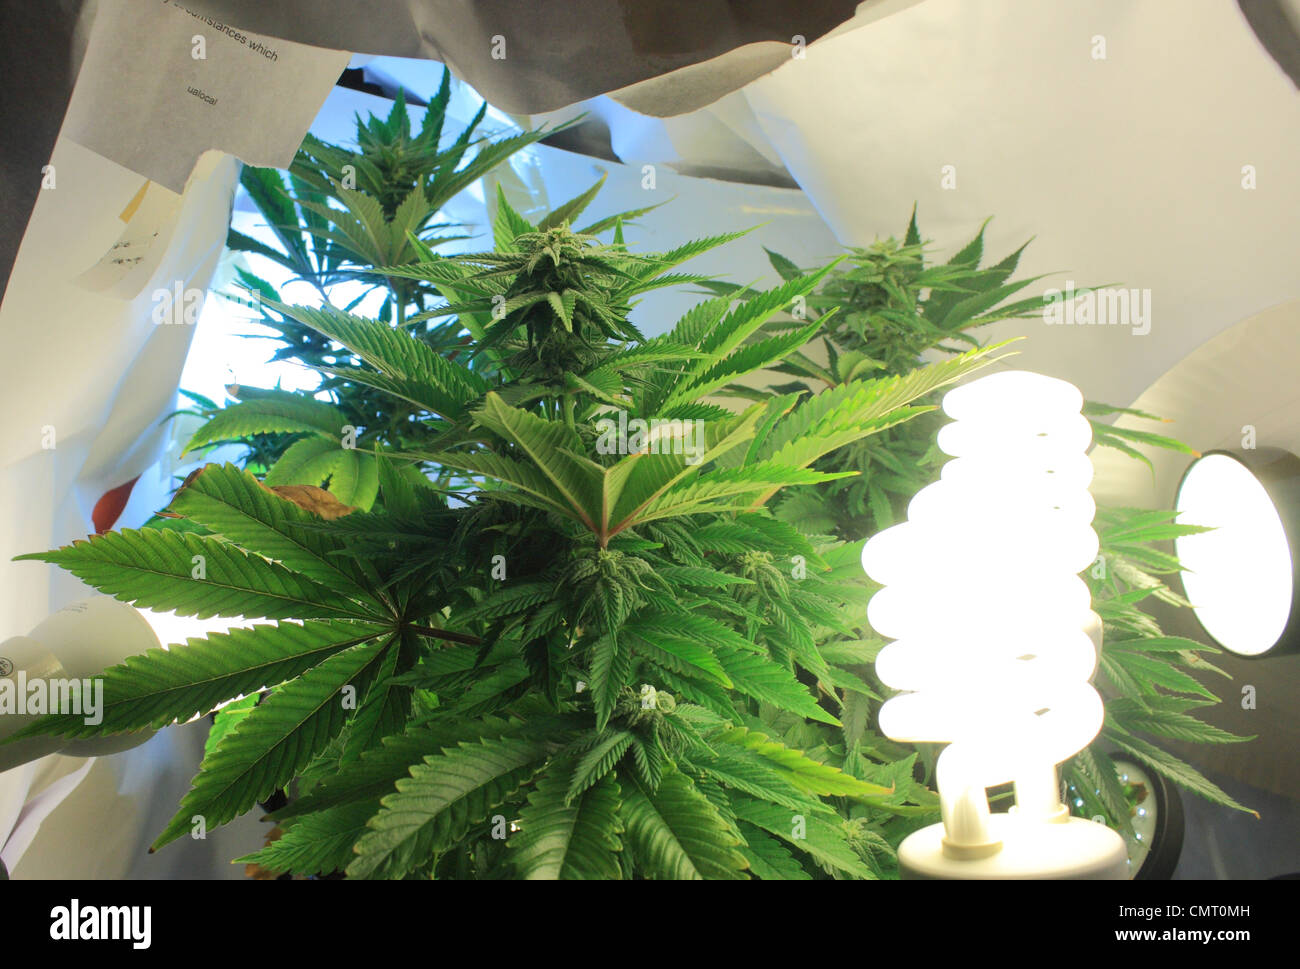 A cannabis plant being grown in a makeshift homemade grow tent consisting of sheets of paper and compact fluorescent lighting. Stock Photo